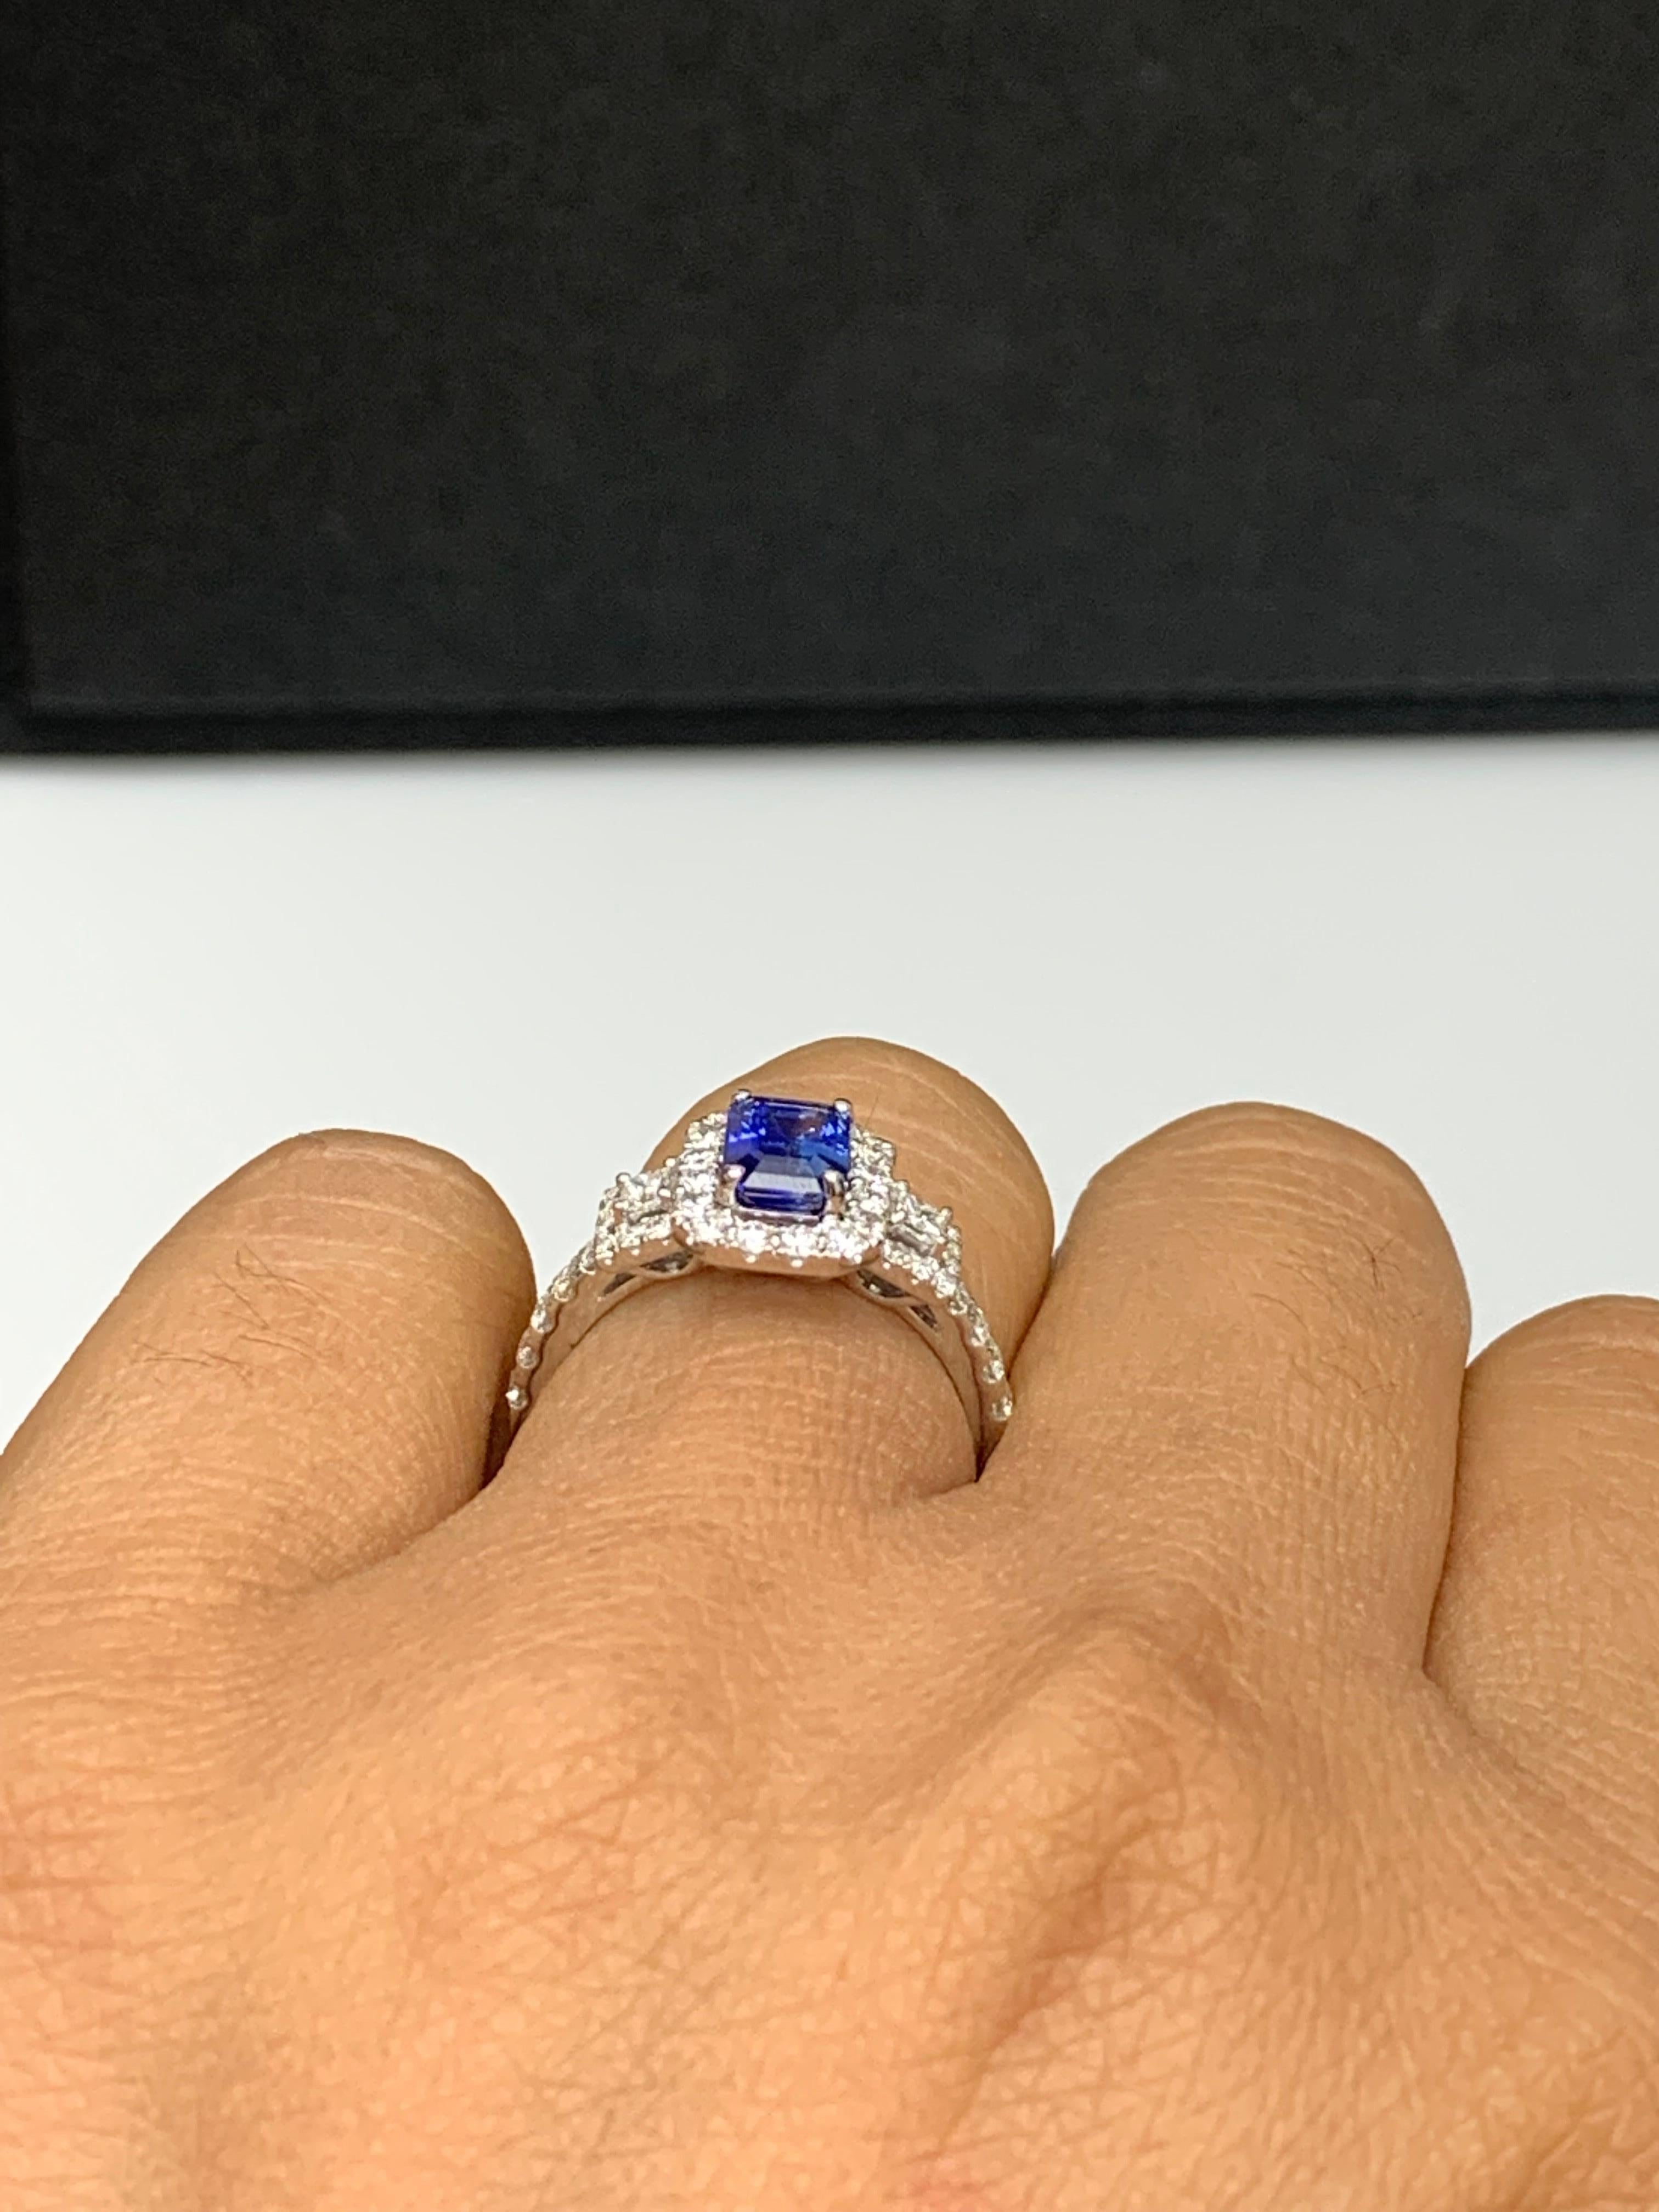 1.21 Carat Emerald Cut Blue Sapphire and Diamond Halo Ring in 18K White Gold For Sale 3